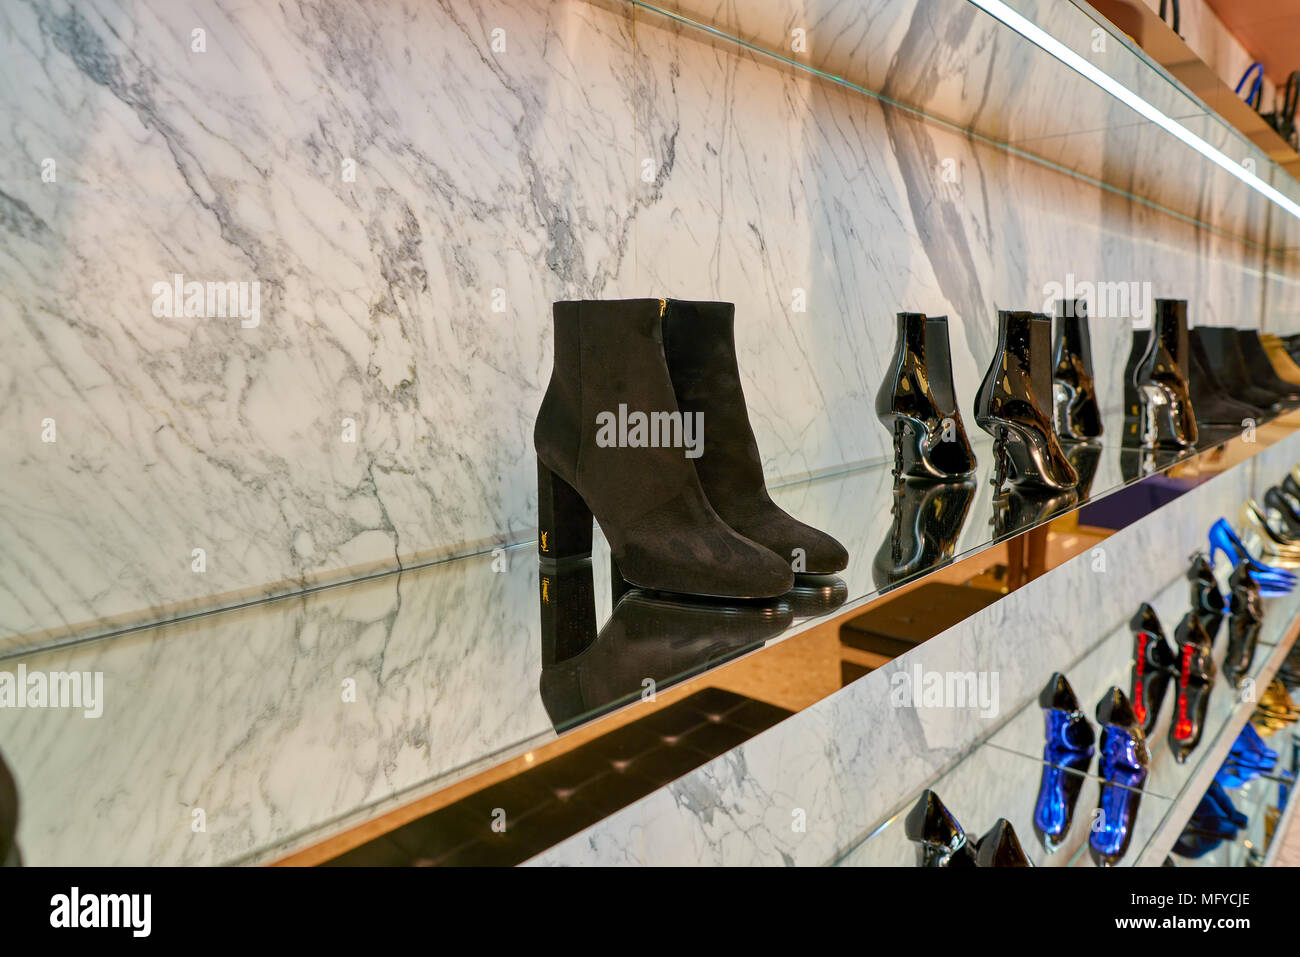 ROME, ITALY - CIRCA NOVEMBER, 2017: Saint Laurent shoes on display at a second flagship store of Rinascente in Rome. Stock Photo